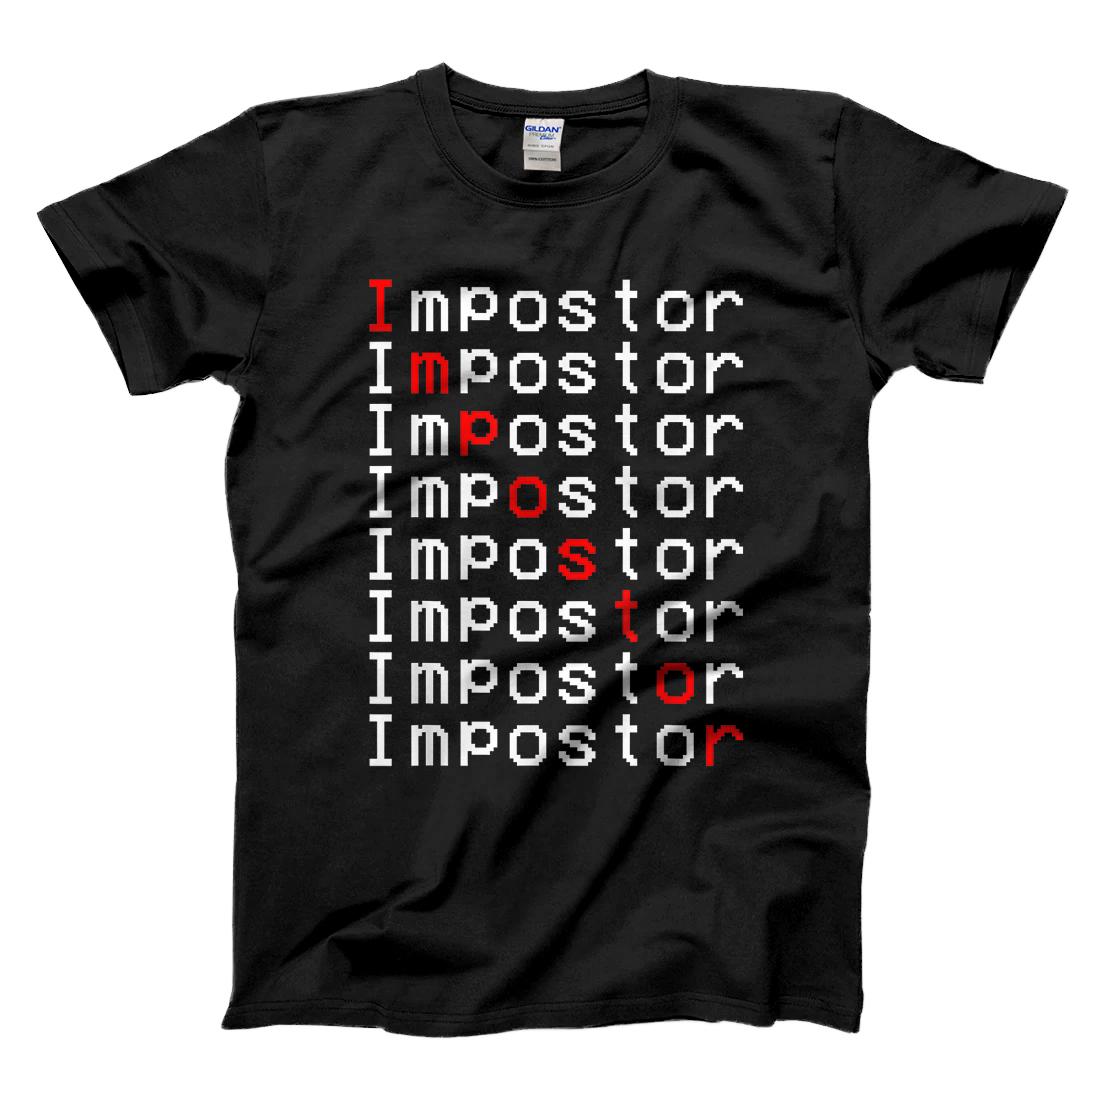 Personalized Impostor Impostor Repeated Shirt - Video Gamer Graphic Tee T-Shirt